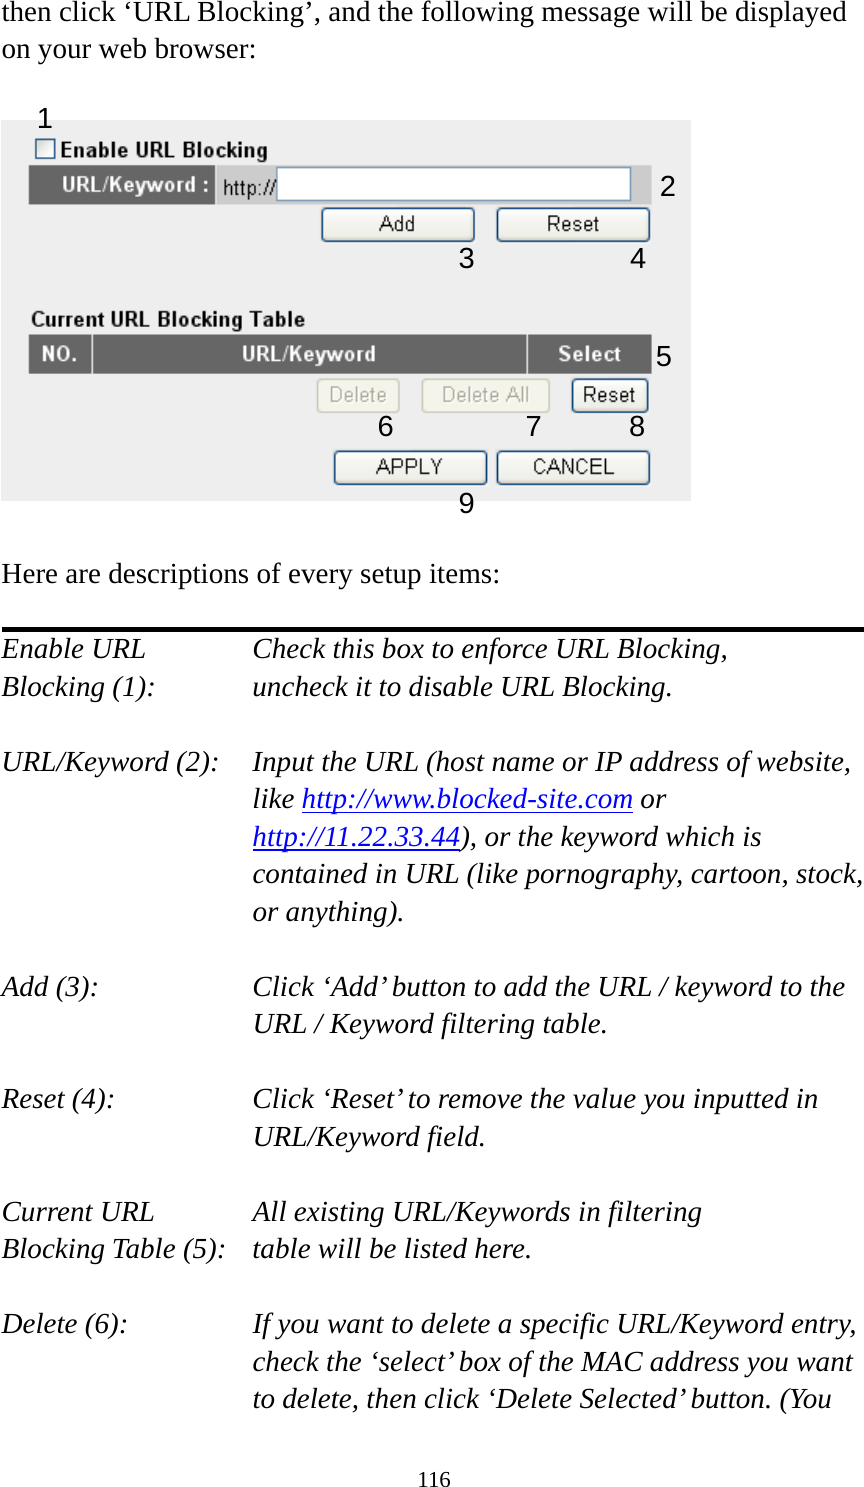 116 then click ‘URL Blocking’, and the following message will be displayed on your web browser:    Here are descriptions of every setup items:  Enable URL      Check this box to enforce URL Blocking, Blocking (1):      uncheck it to disable URL Blocking.  URL/Keyword (2):    Input the URL (host name or IP address of website, like http://www.blocked-site.com or http://11.22.33.44), or the keyword which is contained in URL (like pornography, cartoon, stock, or anything).  Add (3):    Click ‘Add’ button to add the URL / keyword to the URL / Keyword filtering table.  Reset (4):    Click ‘Reset’ to remove the value you inputted in URL/Keyword field.  Current URL      All existing URL/Keywords in filtering Blocking Table (5):   table will be listed here.  Delete (6):    If you want to delete a specific URL/Keyword entry, check the ‘select’ box of the MAC address you want to delete, then click ‘Delete Selected’ button. (You 2 3 4 5 6 7 8 9 1 